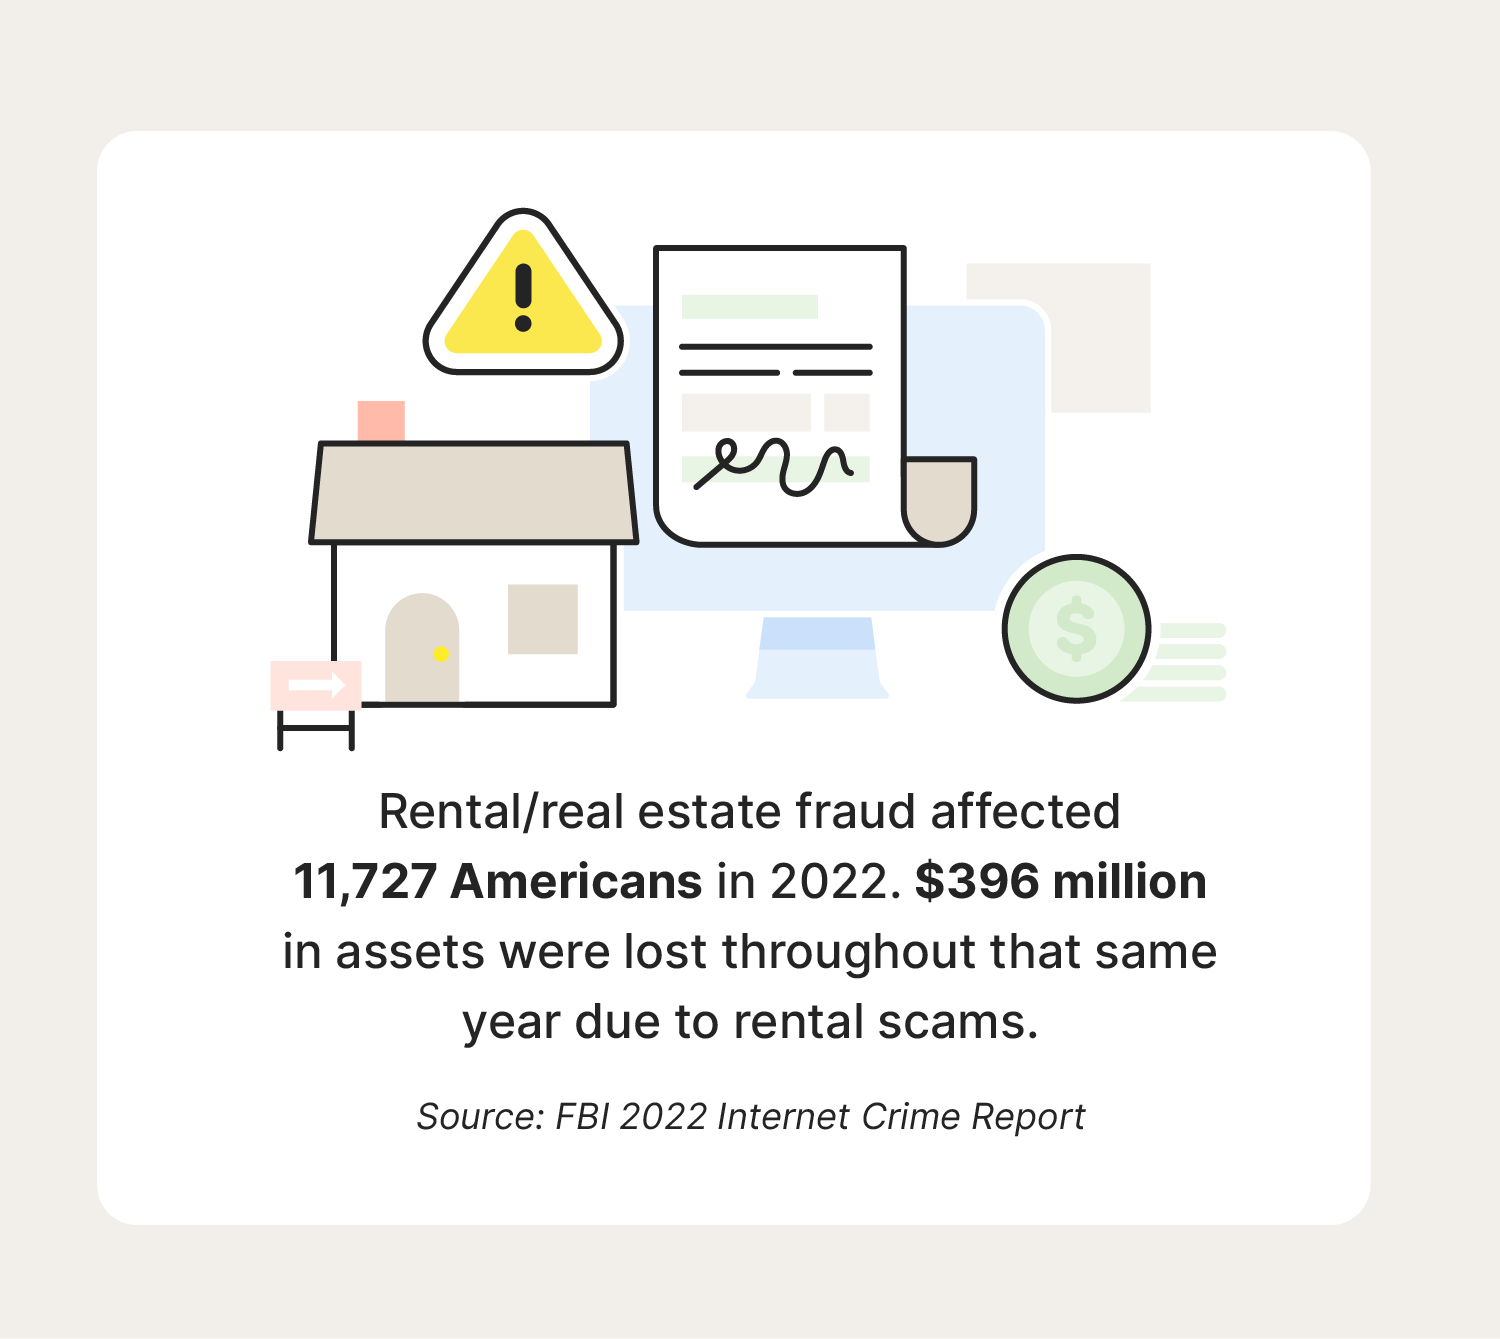 An icon of a house and piece of paper represent the rental scam statistic that 11,727 Americans were affected by rental fraud in 2022.